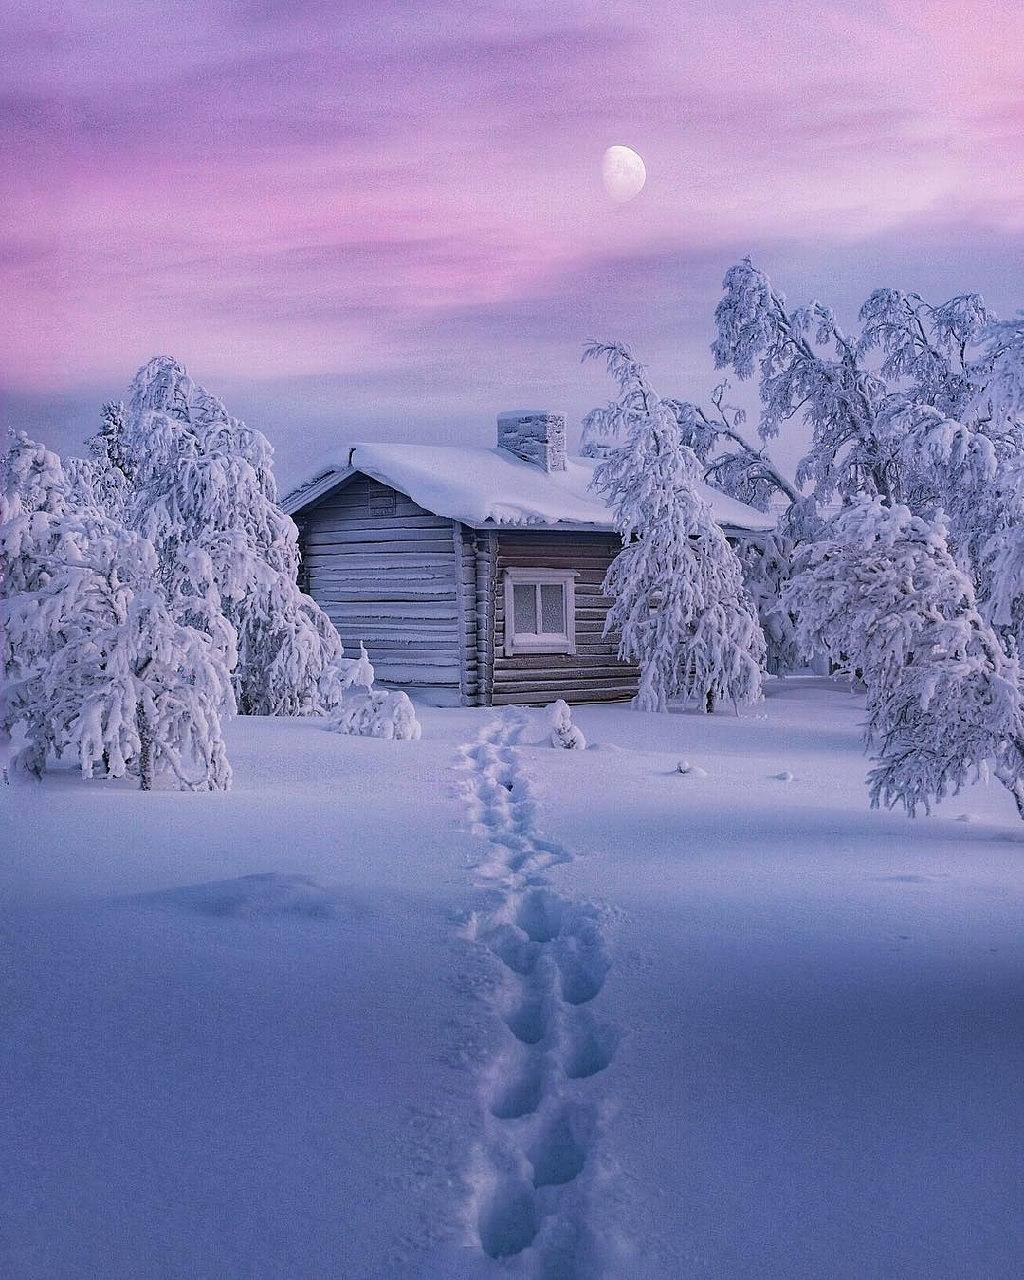 hd nature wallpaper for android, snow, winter, nature, home, freezing, sky, frost, natural landscape, tree, house